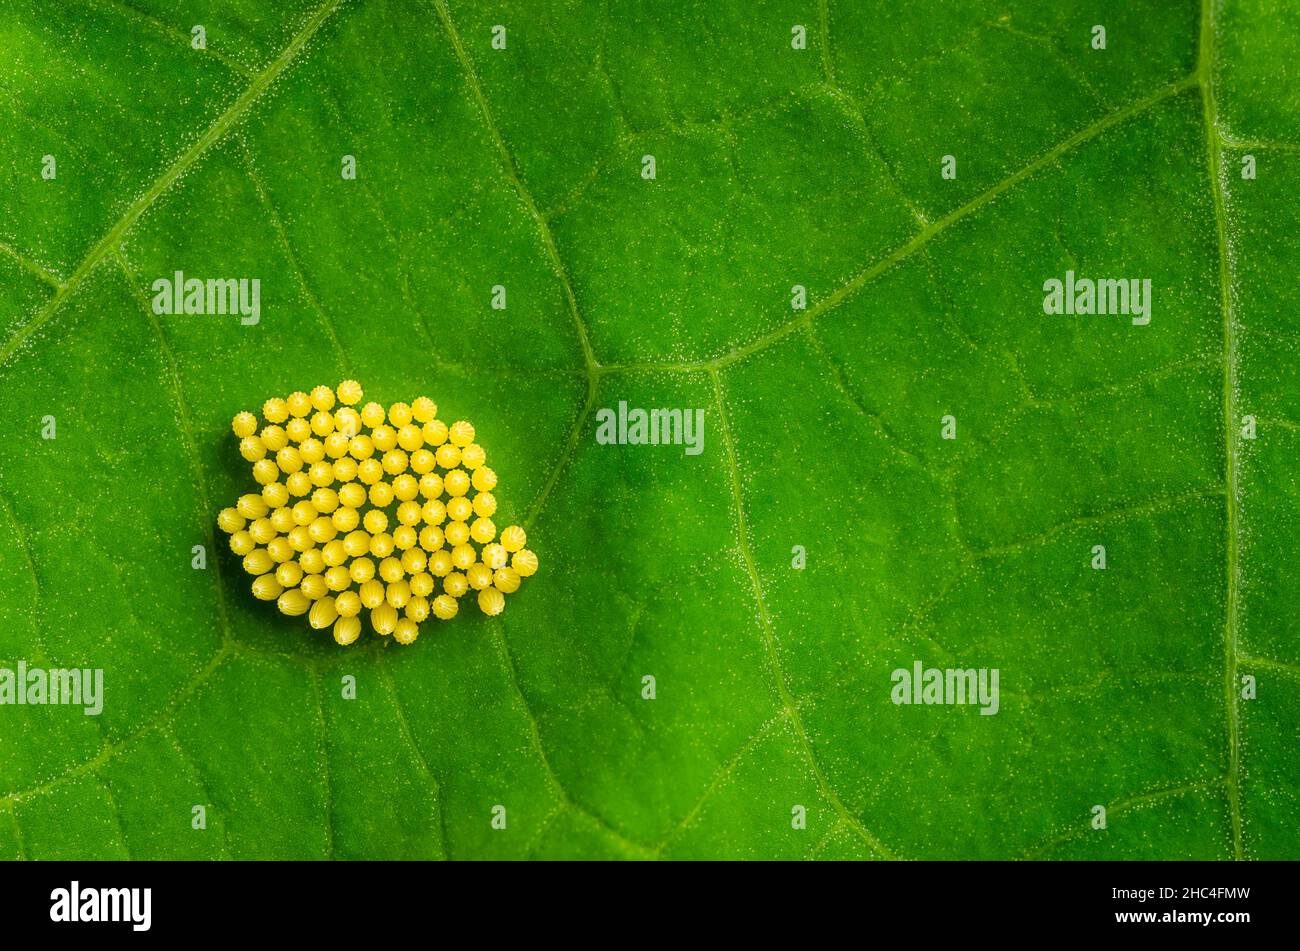 Small cabbage white butterfly eggs on a green leaf, closeup, from above. Yellowish eggs of Pieris rapae, known as small white or cabbage butterfly. Stock Photo